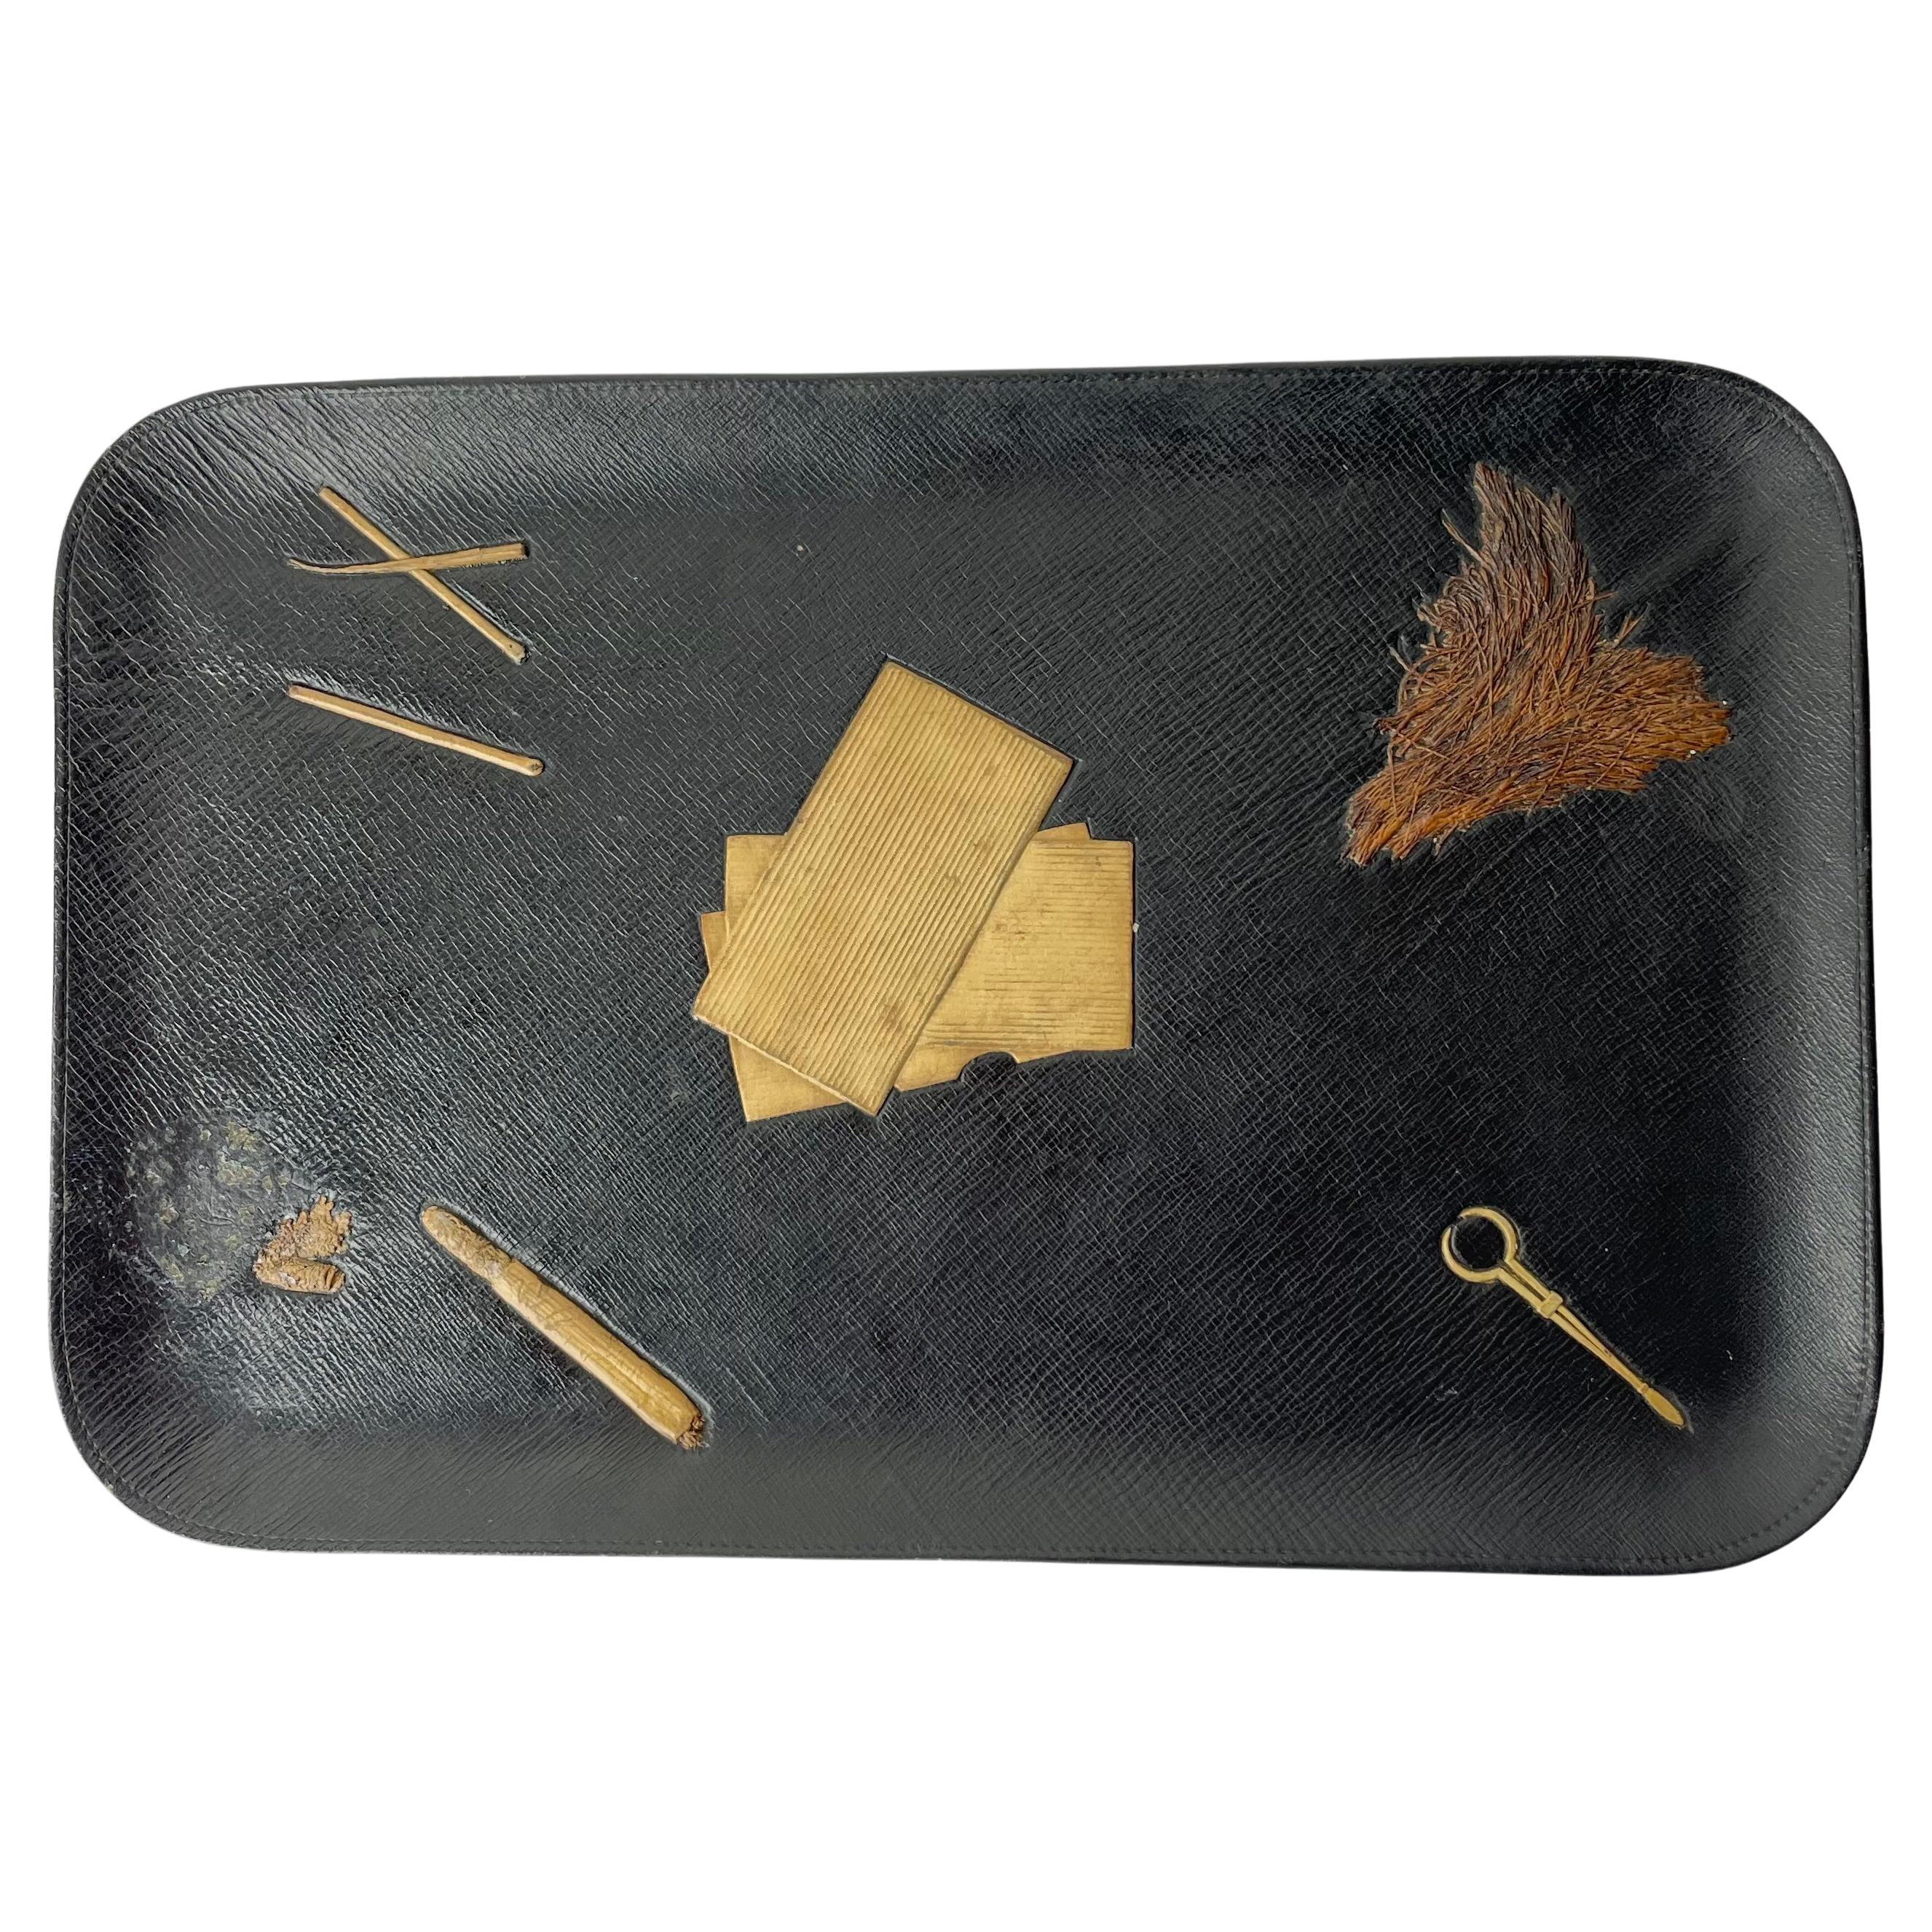 Leather-covered Desk Dish with Smoking Accessories from the early 20th Century